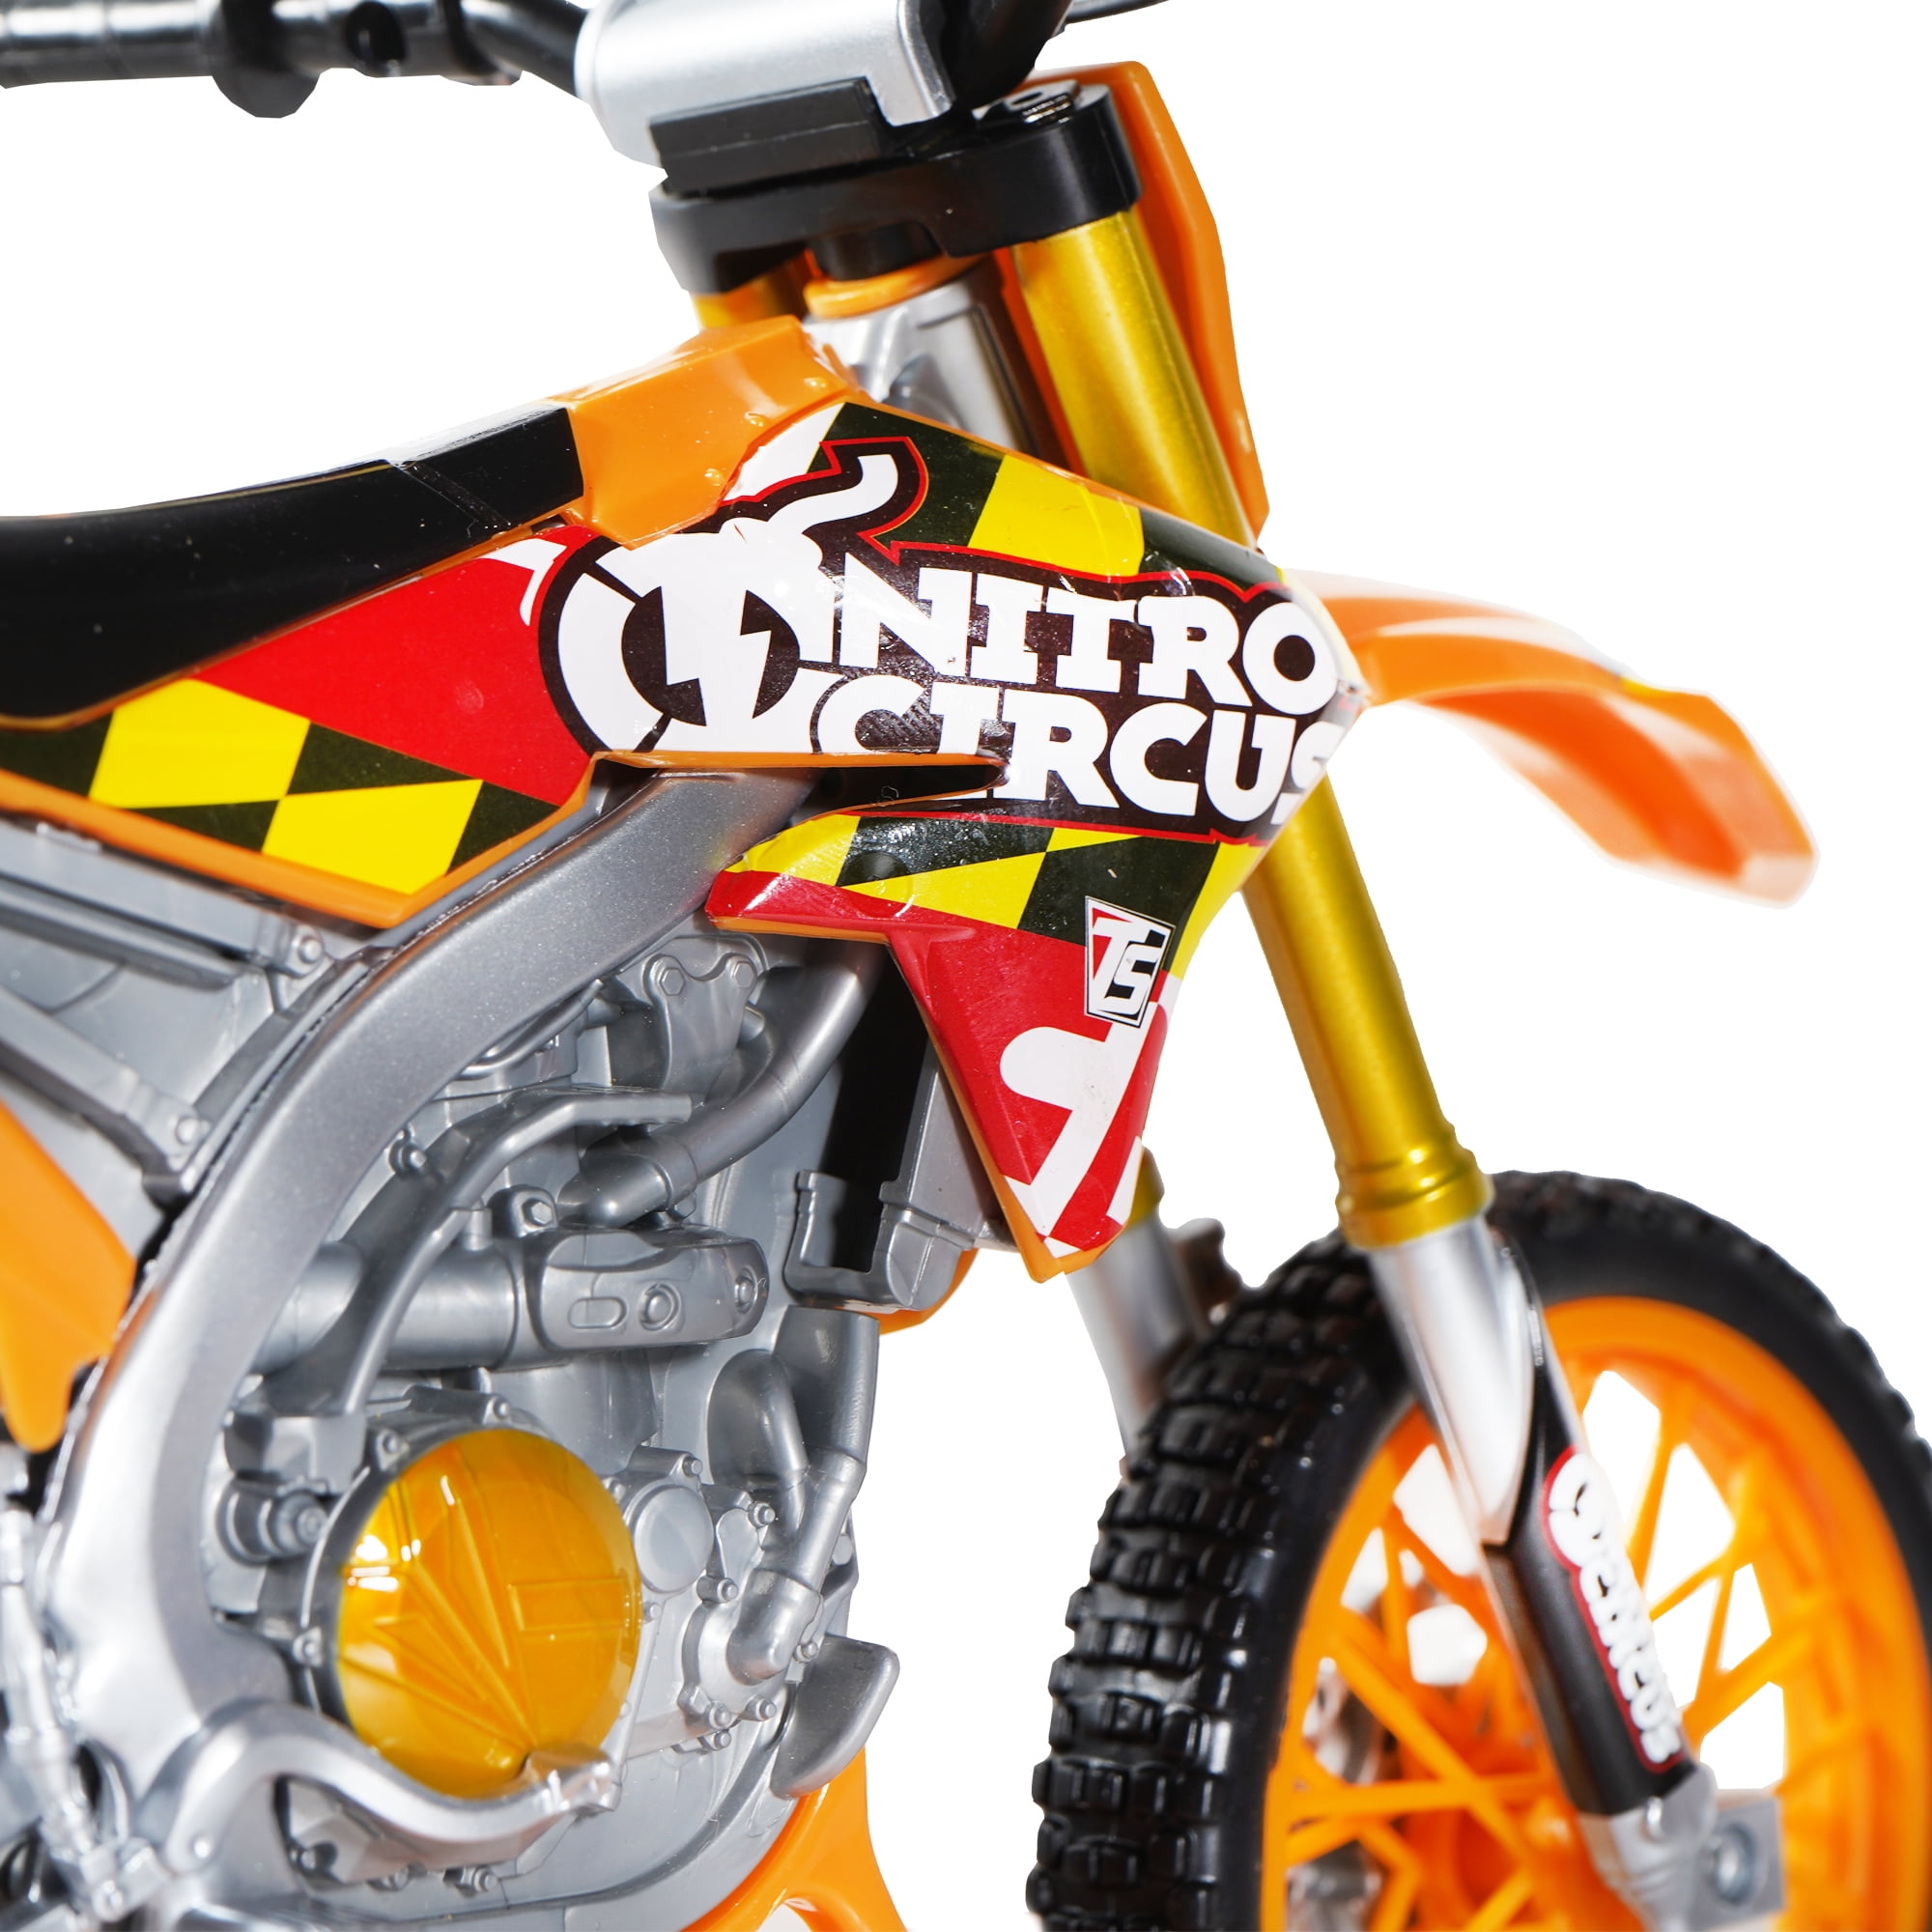 Buy JAPSI Rugged Bike, Bike Toy For Kids, Pull Back Action, Kids and Toy  Collector, Toy Vehicle For Kids